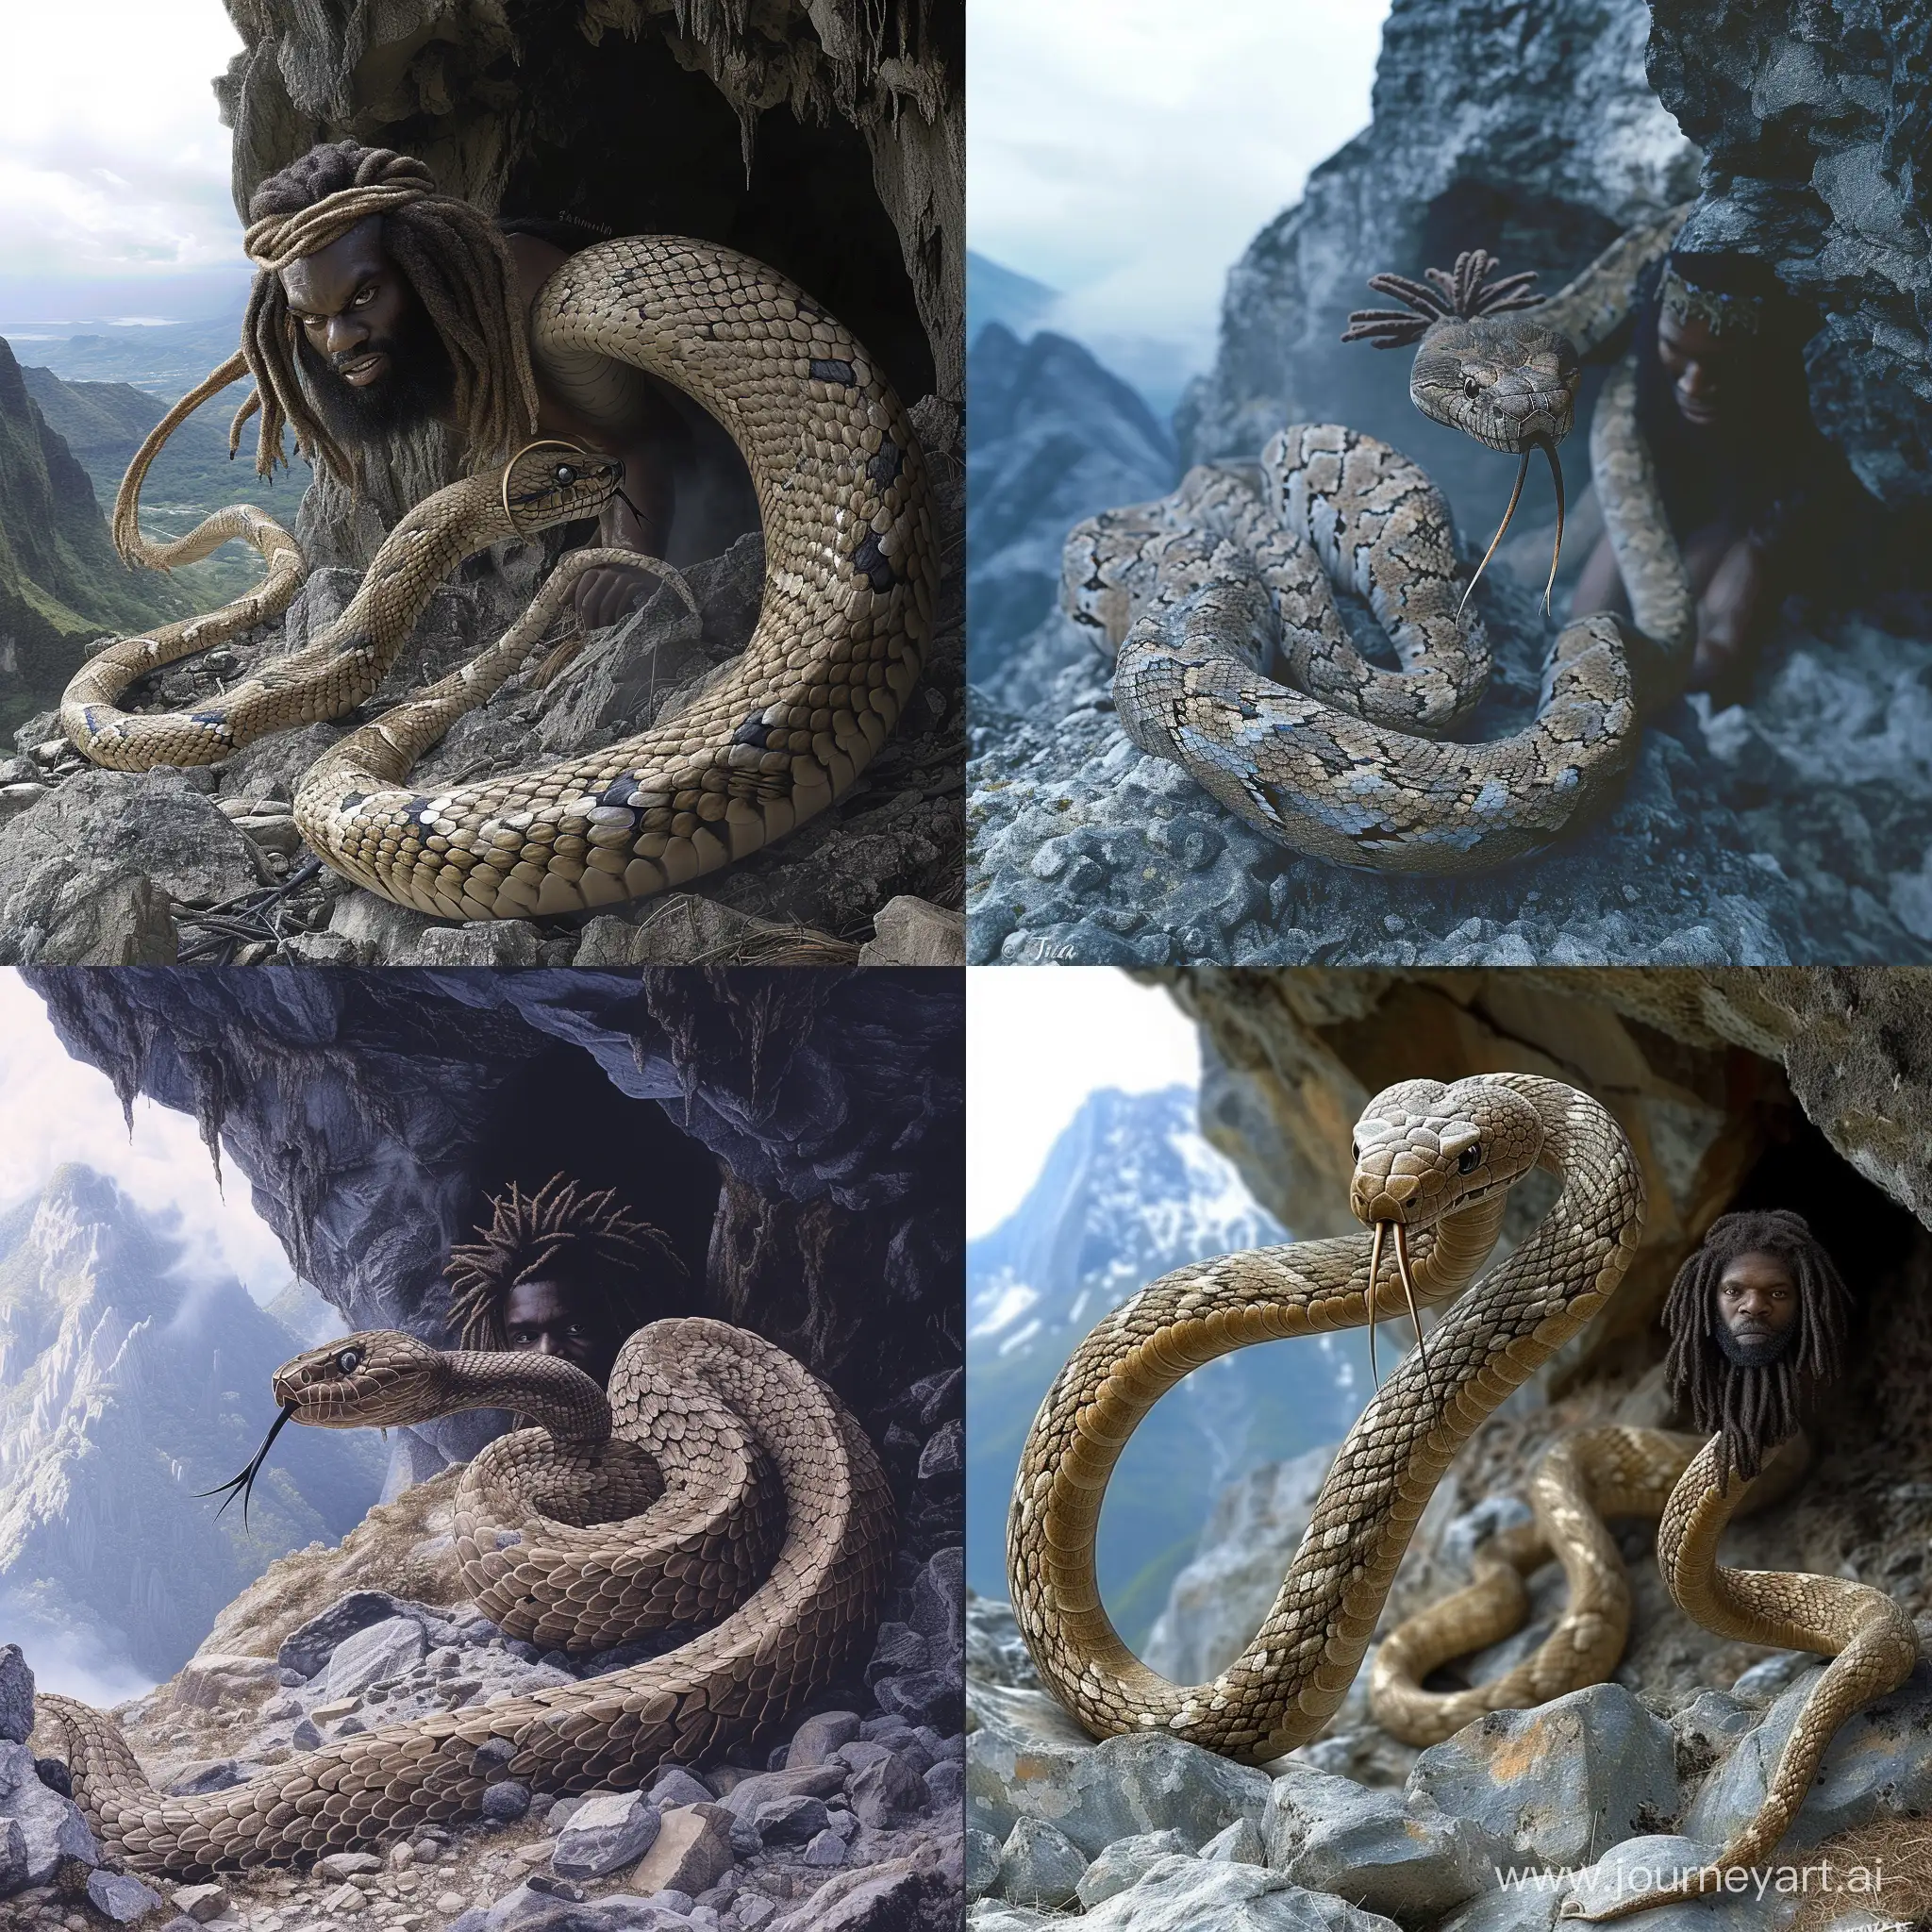 a long snake with a ringed tail but with a face of a dark man with dreadlocked hair, Fijian face, photorealistic, Fijian mountain, cold, coming out of a mountain cave